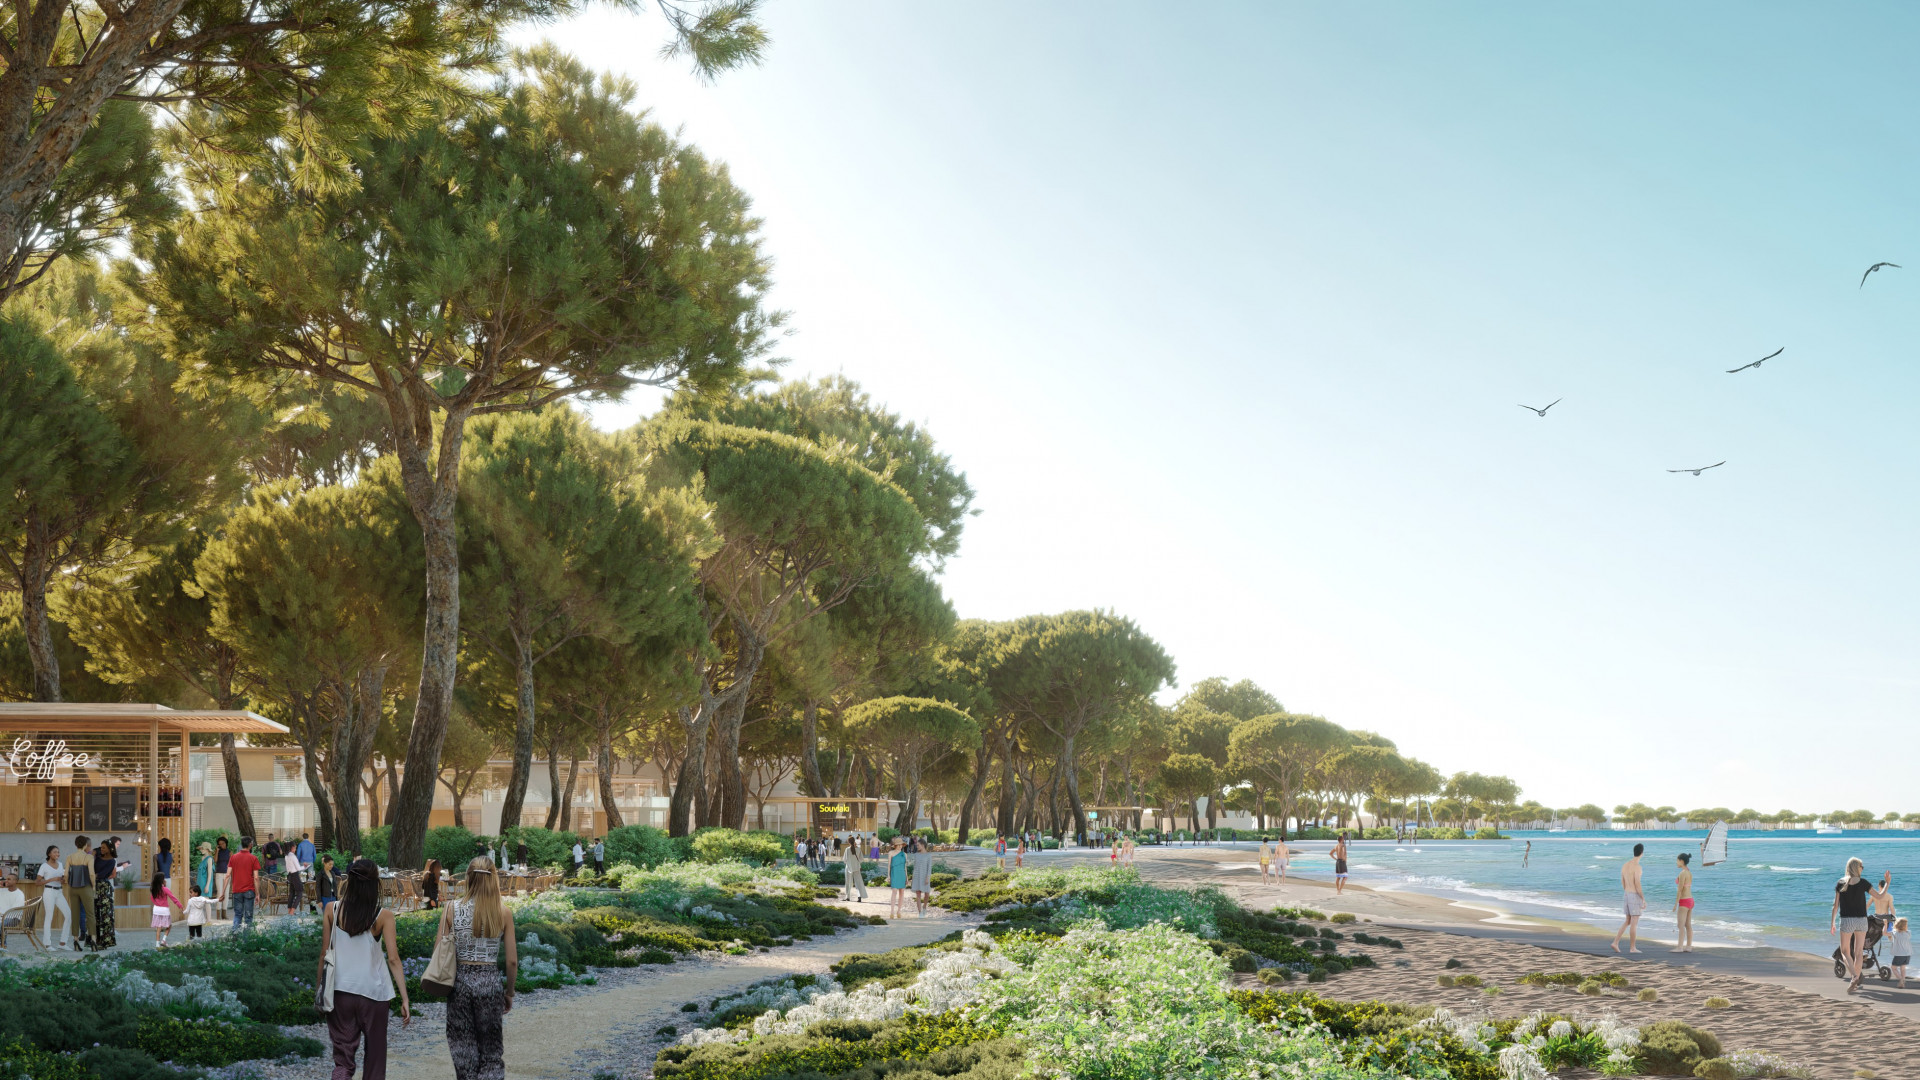 Petrolina Group presents the vision and architectural approach for Larnaka Land of Tomorrow